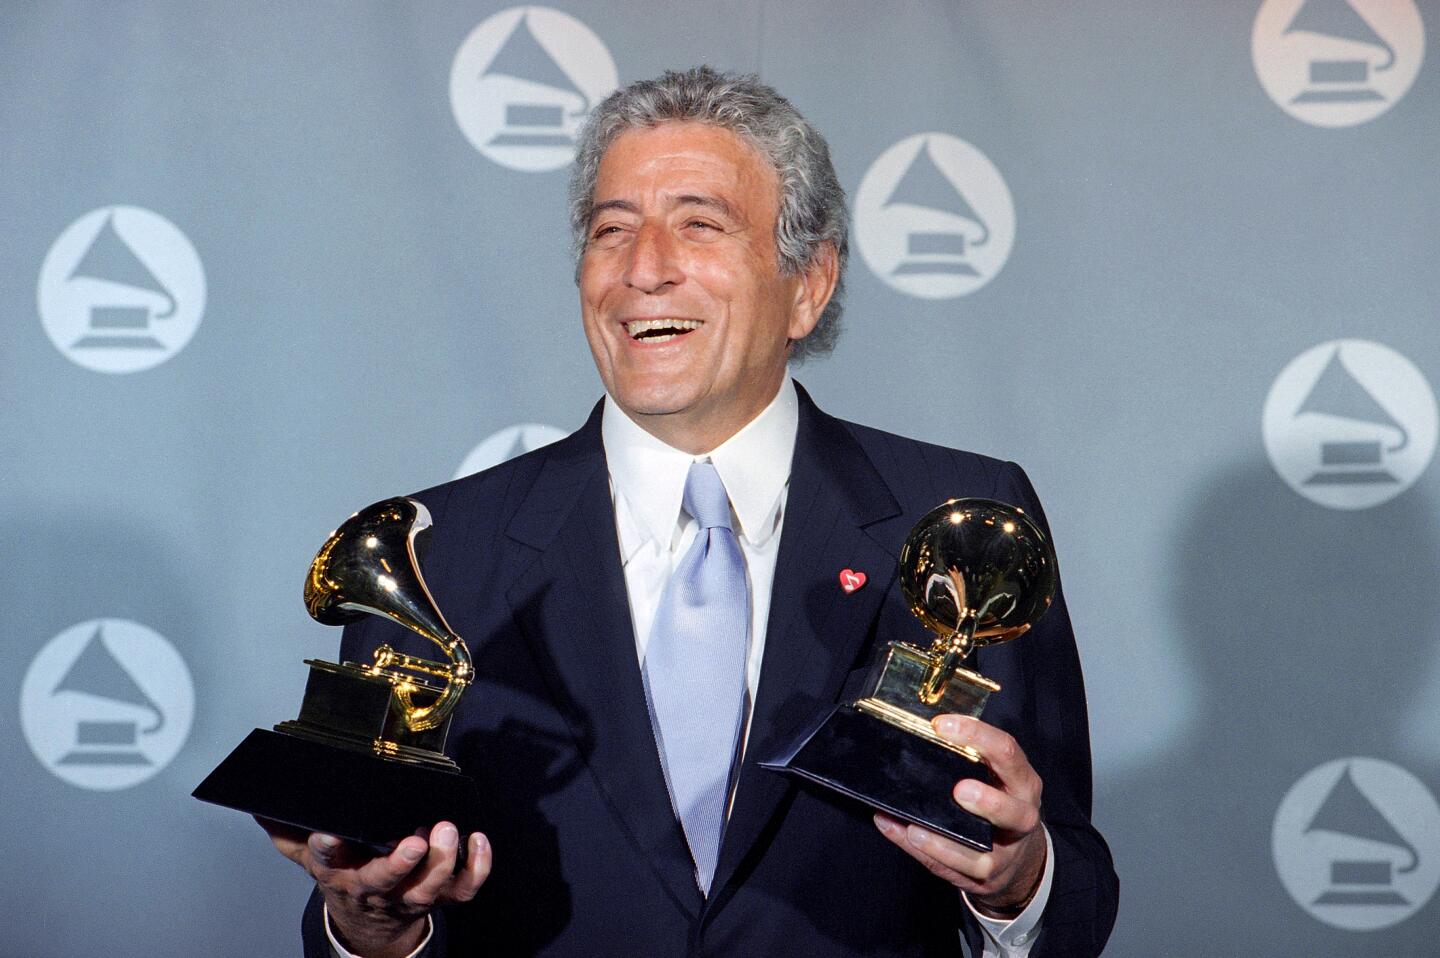 Tony Bennett displays his two Grammy's backstage at the Shrine Auditorium in Los Angeles